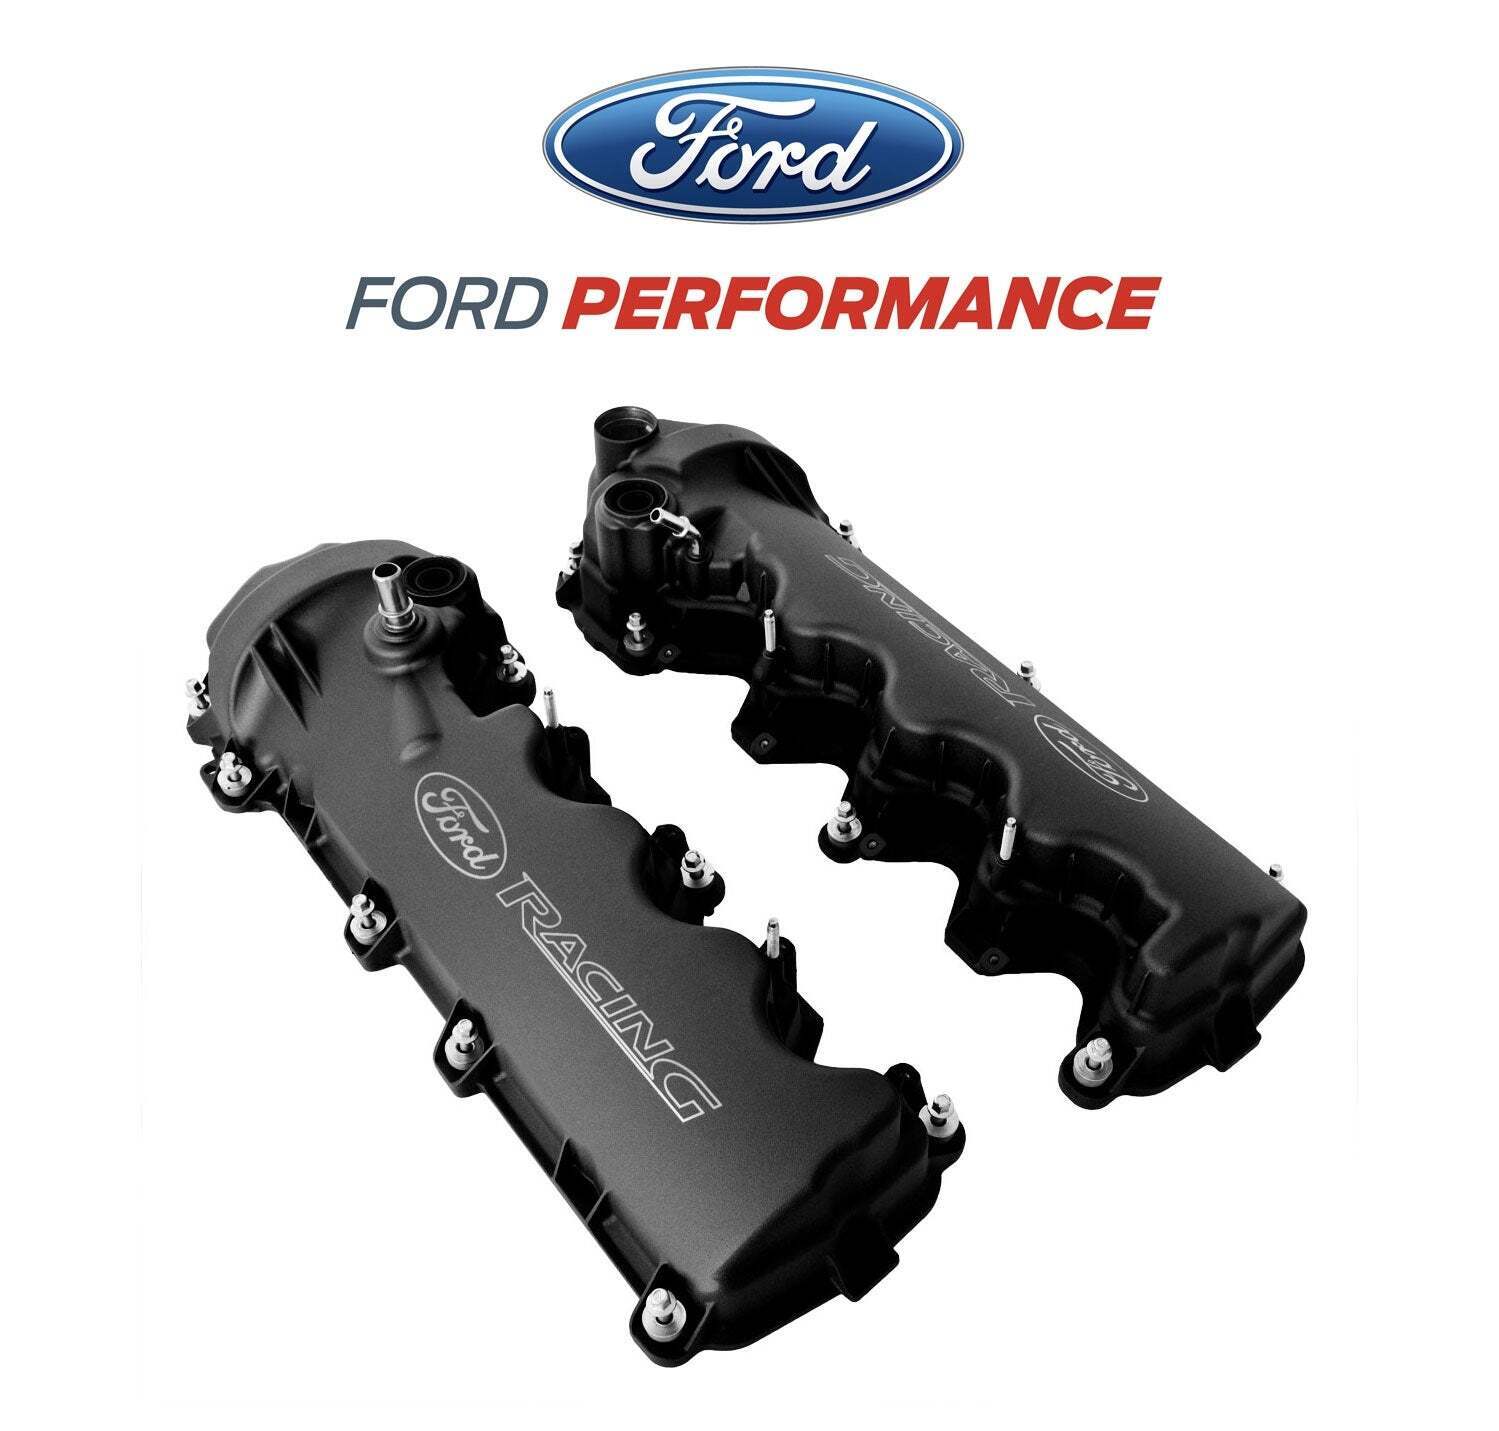 2005-2010 Ford Mustang GT 4.6 3V Black Ford Racing Cam Valve Covers Pair